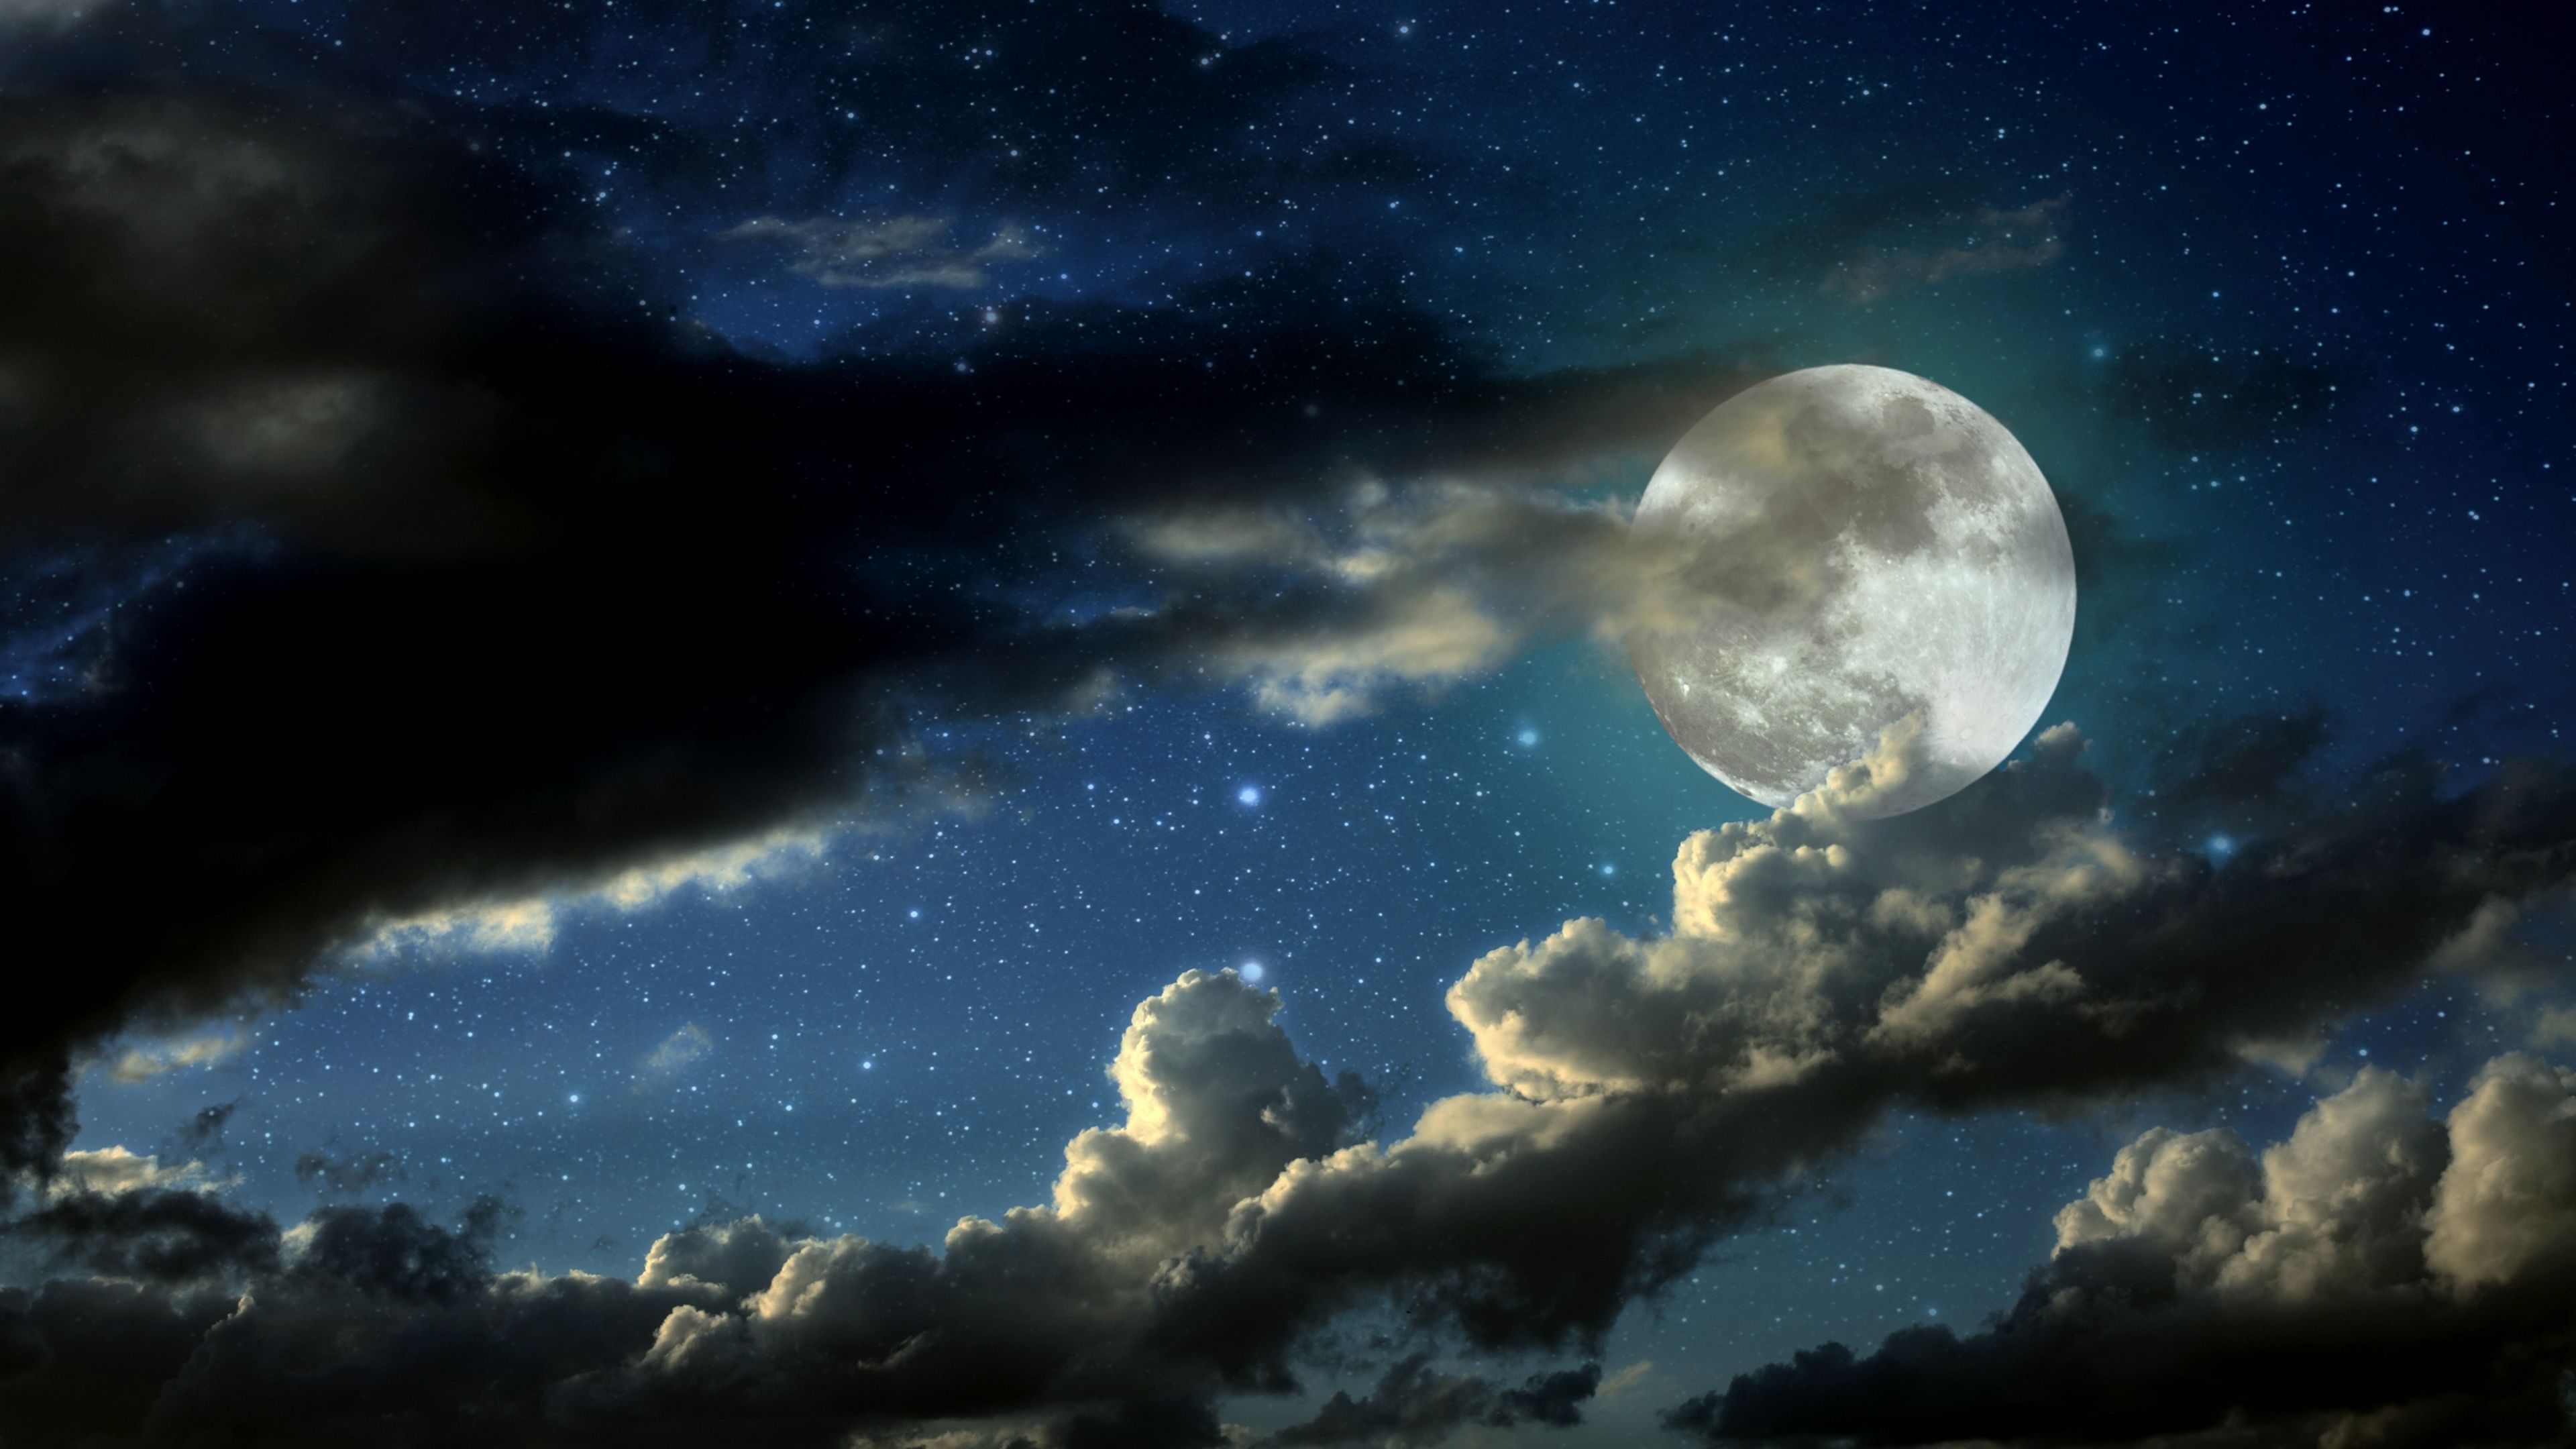 5 beautiful night sky wallpapers for iPhone to download